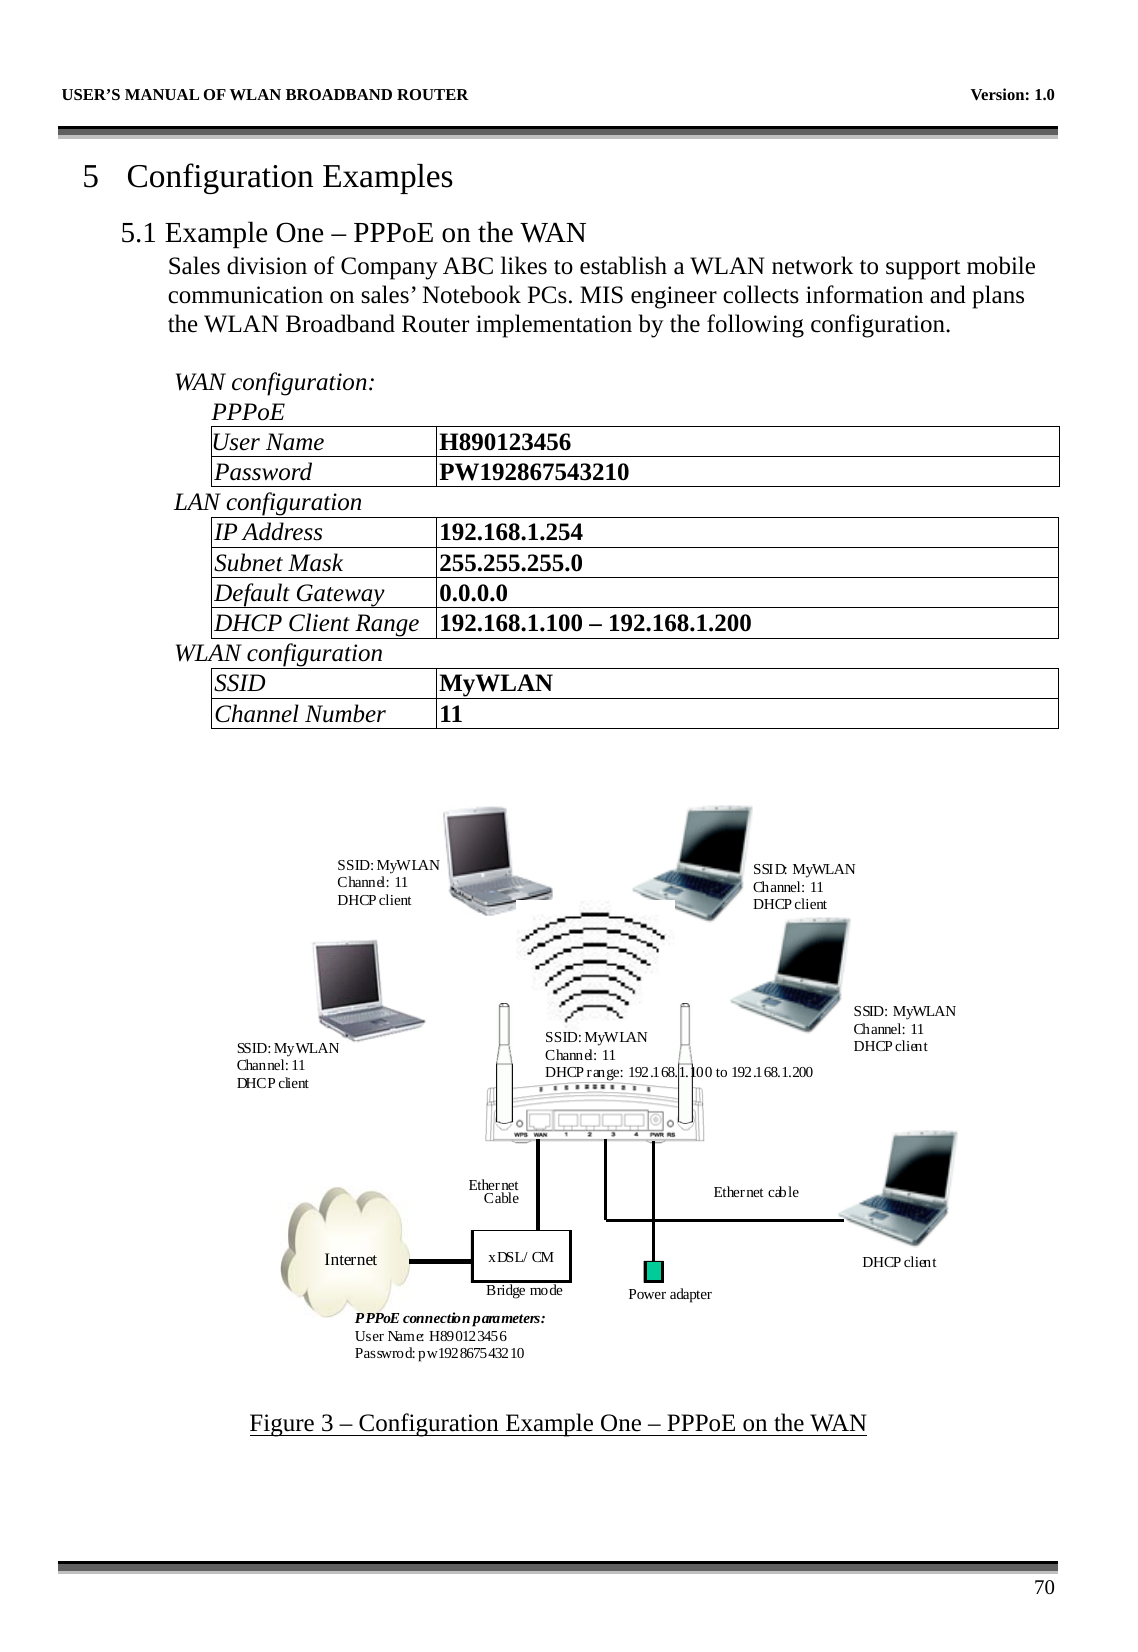   USER’S MANUAL OF WLAN BROADBAND ROUTER    Version: 1.0      70 5 Configuration Examples 5.1 Example One – PPPoE on the WAN Sales division of Company ABC likes to establish a WLAN network to support mobile communication on sales’ Notebook PCs. MIS engineer collects information and plans the WLAN Broadband Router implementation by the following configuration.  WAN configuration:   PPPoE User Name  H890123456 Password  PW192867543210 LAN configuration IP Address  192.168.1.254 Subnet Mask  255.255.255.0 Default Gateway  0.0.0.0 DHCP Client Range  192.168.1.100 – 192.168.1.200 WLAN configuration SSID  MyWLAN Channel Number  11 Internet xDSL/ CMPower adapterEthernetCable Ethernet cableSSID: MyWLANChannel: 11 DHCP clientSSID: MyWLANChannel: 11 DHCP clientSSID: MyWLANChannel: 11 DHCP clientSS ID :  M y WLA NChan nel: 11  DHC P cli e ntDHCP clientBridge modeP PPoE connectio n p ara meters:User Name: H890123456Passwrod: pw192867543210SSID: MyWLANChannel: 11DHCP range: 192.168.1.100 to 192.168.1.200 Figure 3 – Configuration Example One – PPPoE on the WAN 